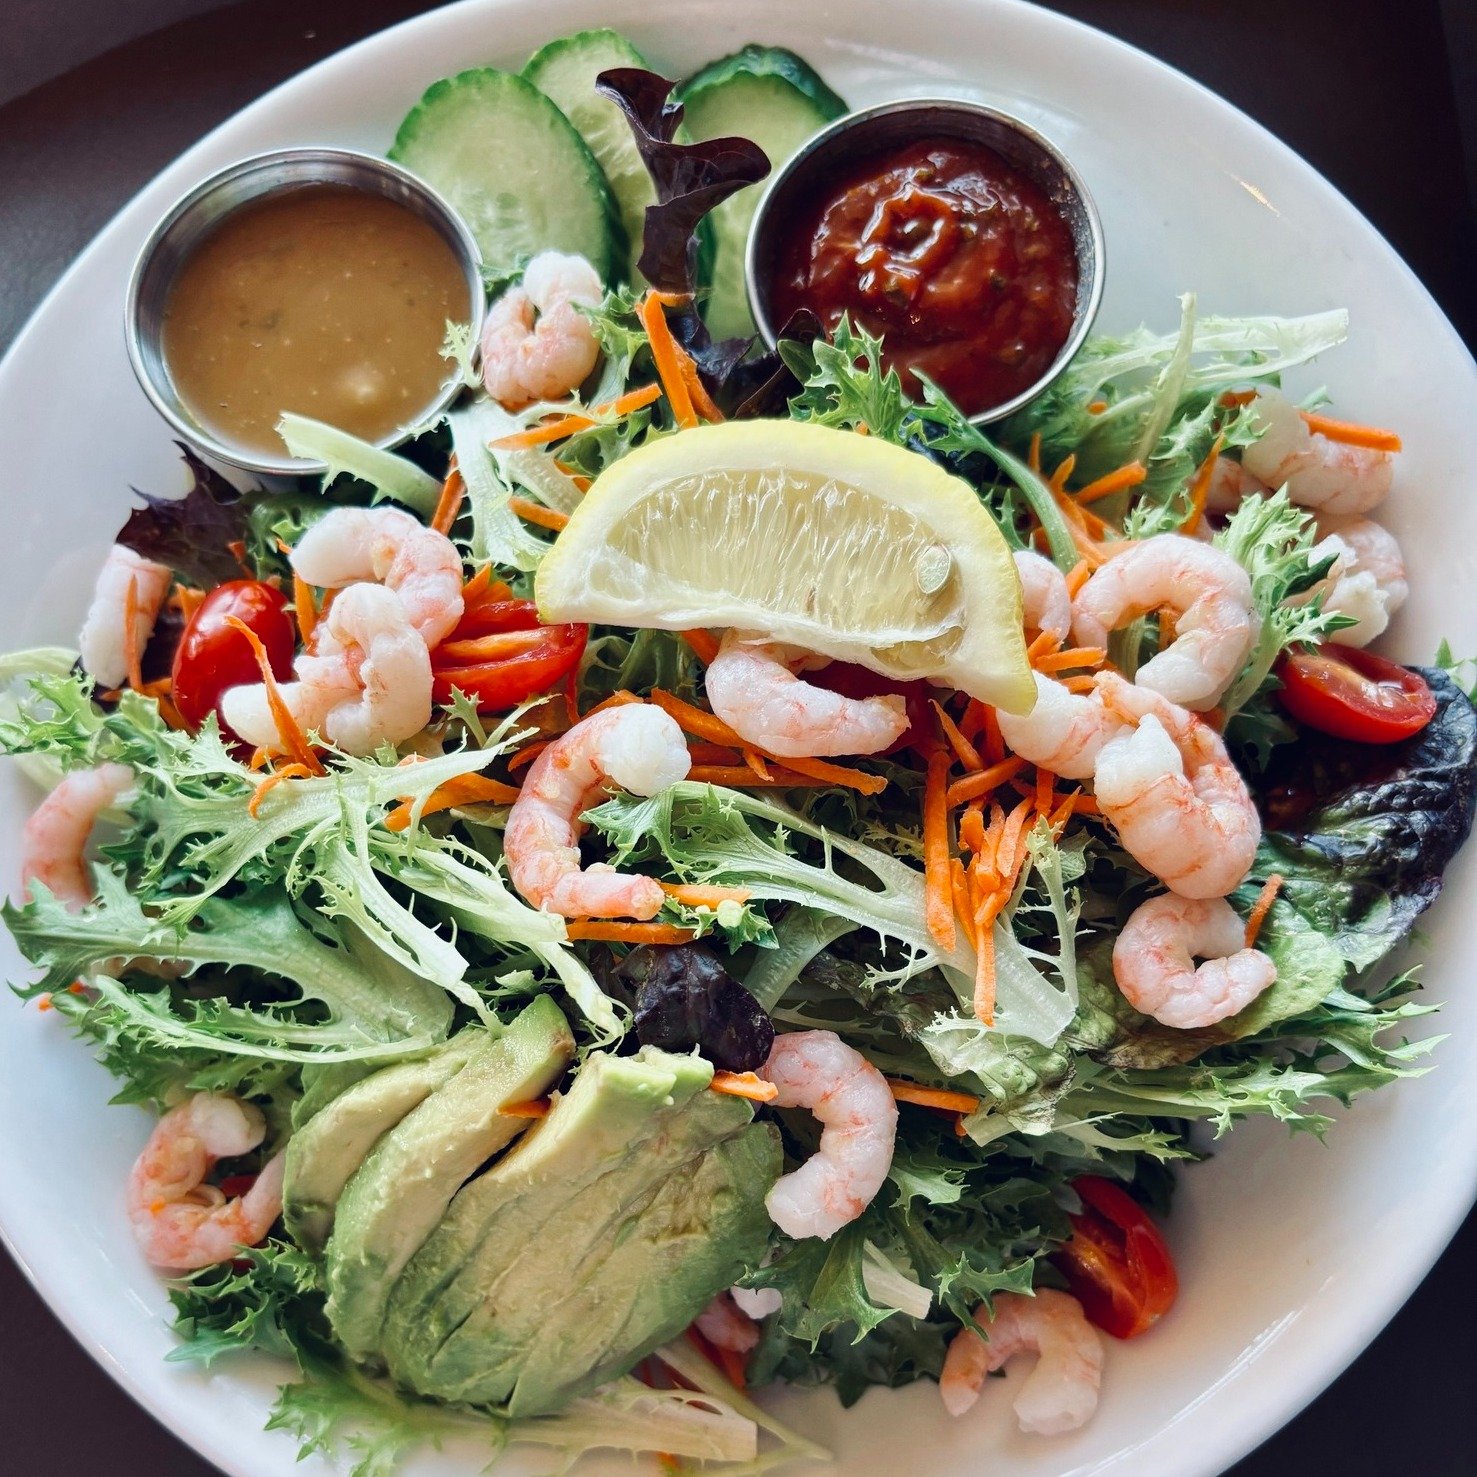 TC's Pub has updated our menu with some great new items like our Shrimp &amp; Avocado Salad &mdash; mixed greens, tomato, cucumber, avocado, shrimp meat &amp; seafood sauce. DROOL 🤤
.
TC's Pub is OPEN for lunch and dinner weekdays from noon-10pm (ki